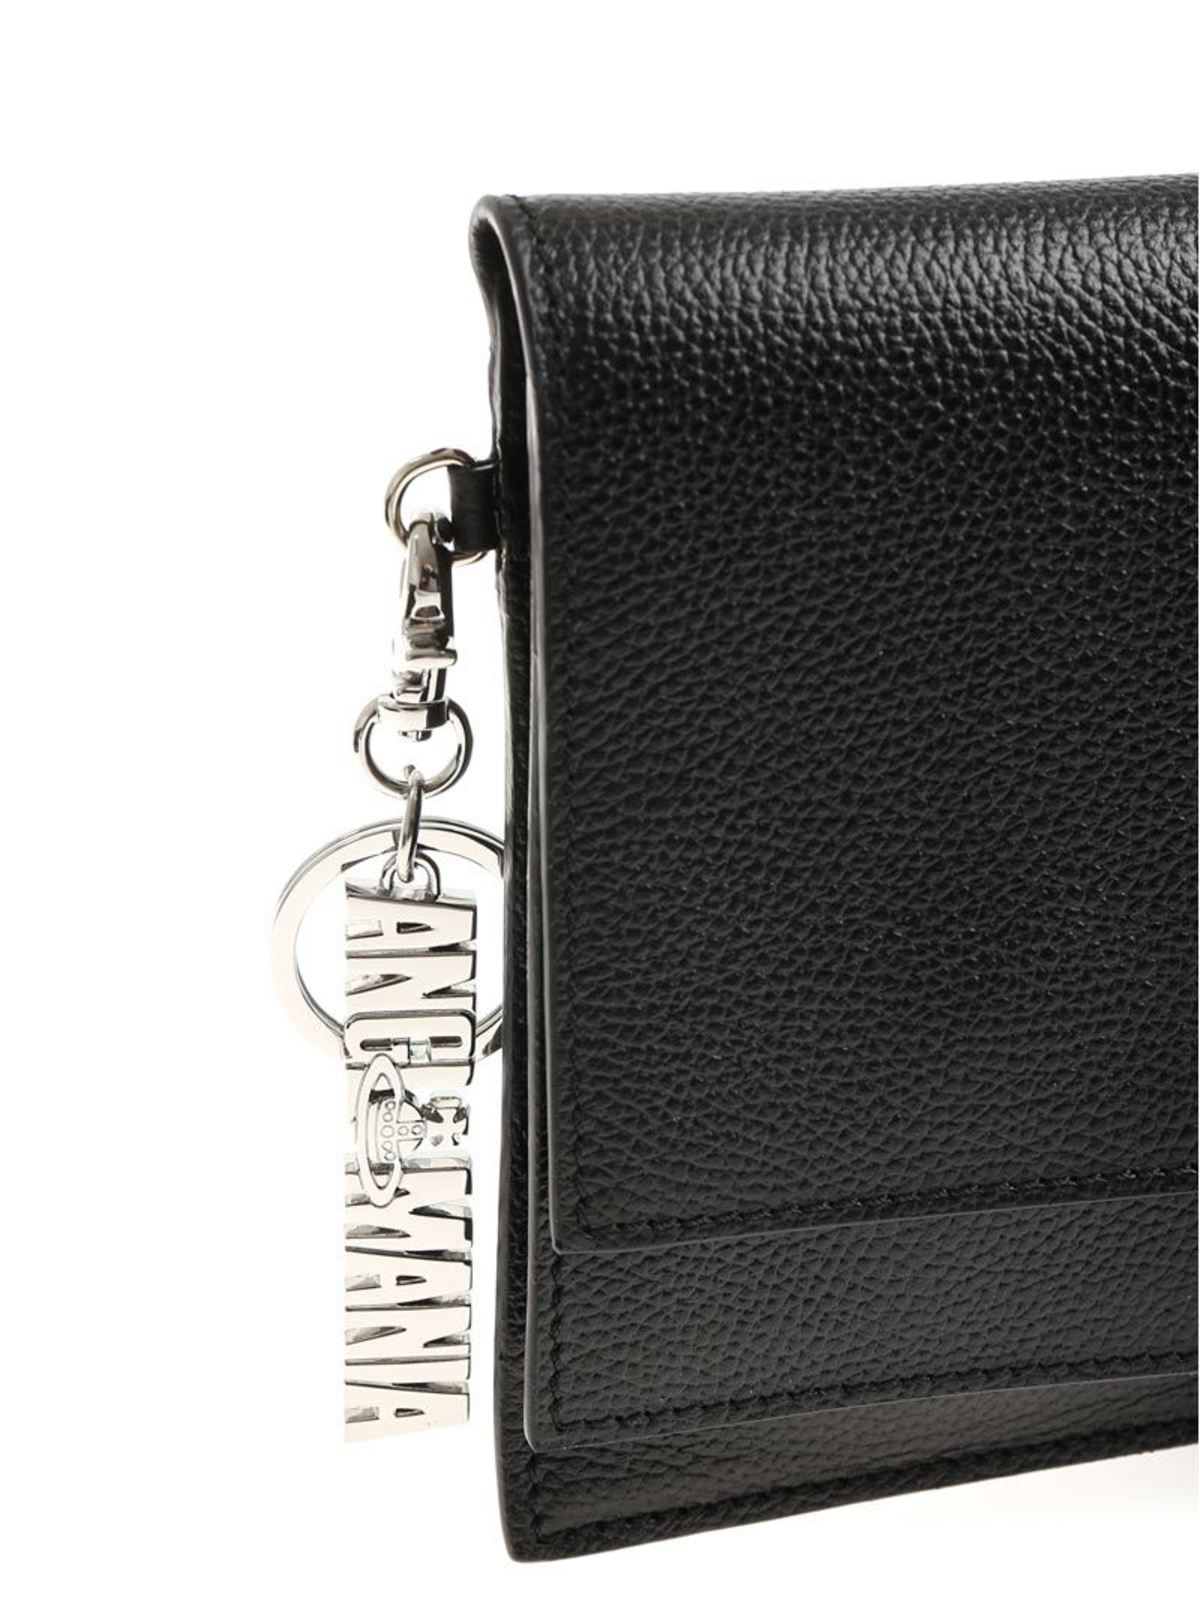 Shop Vivienne Westwood Anglomania Hammered Leather Clutch In Negro